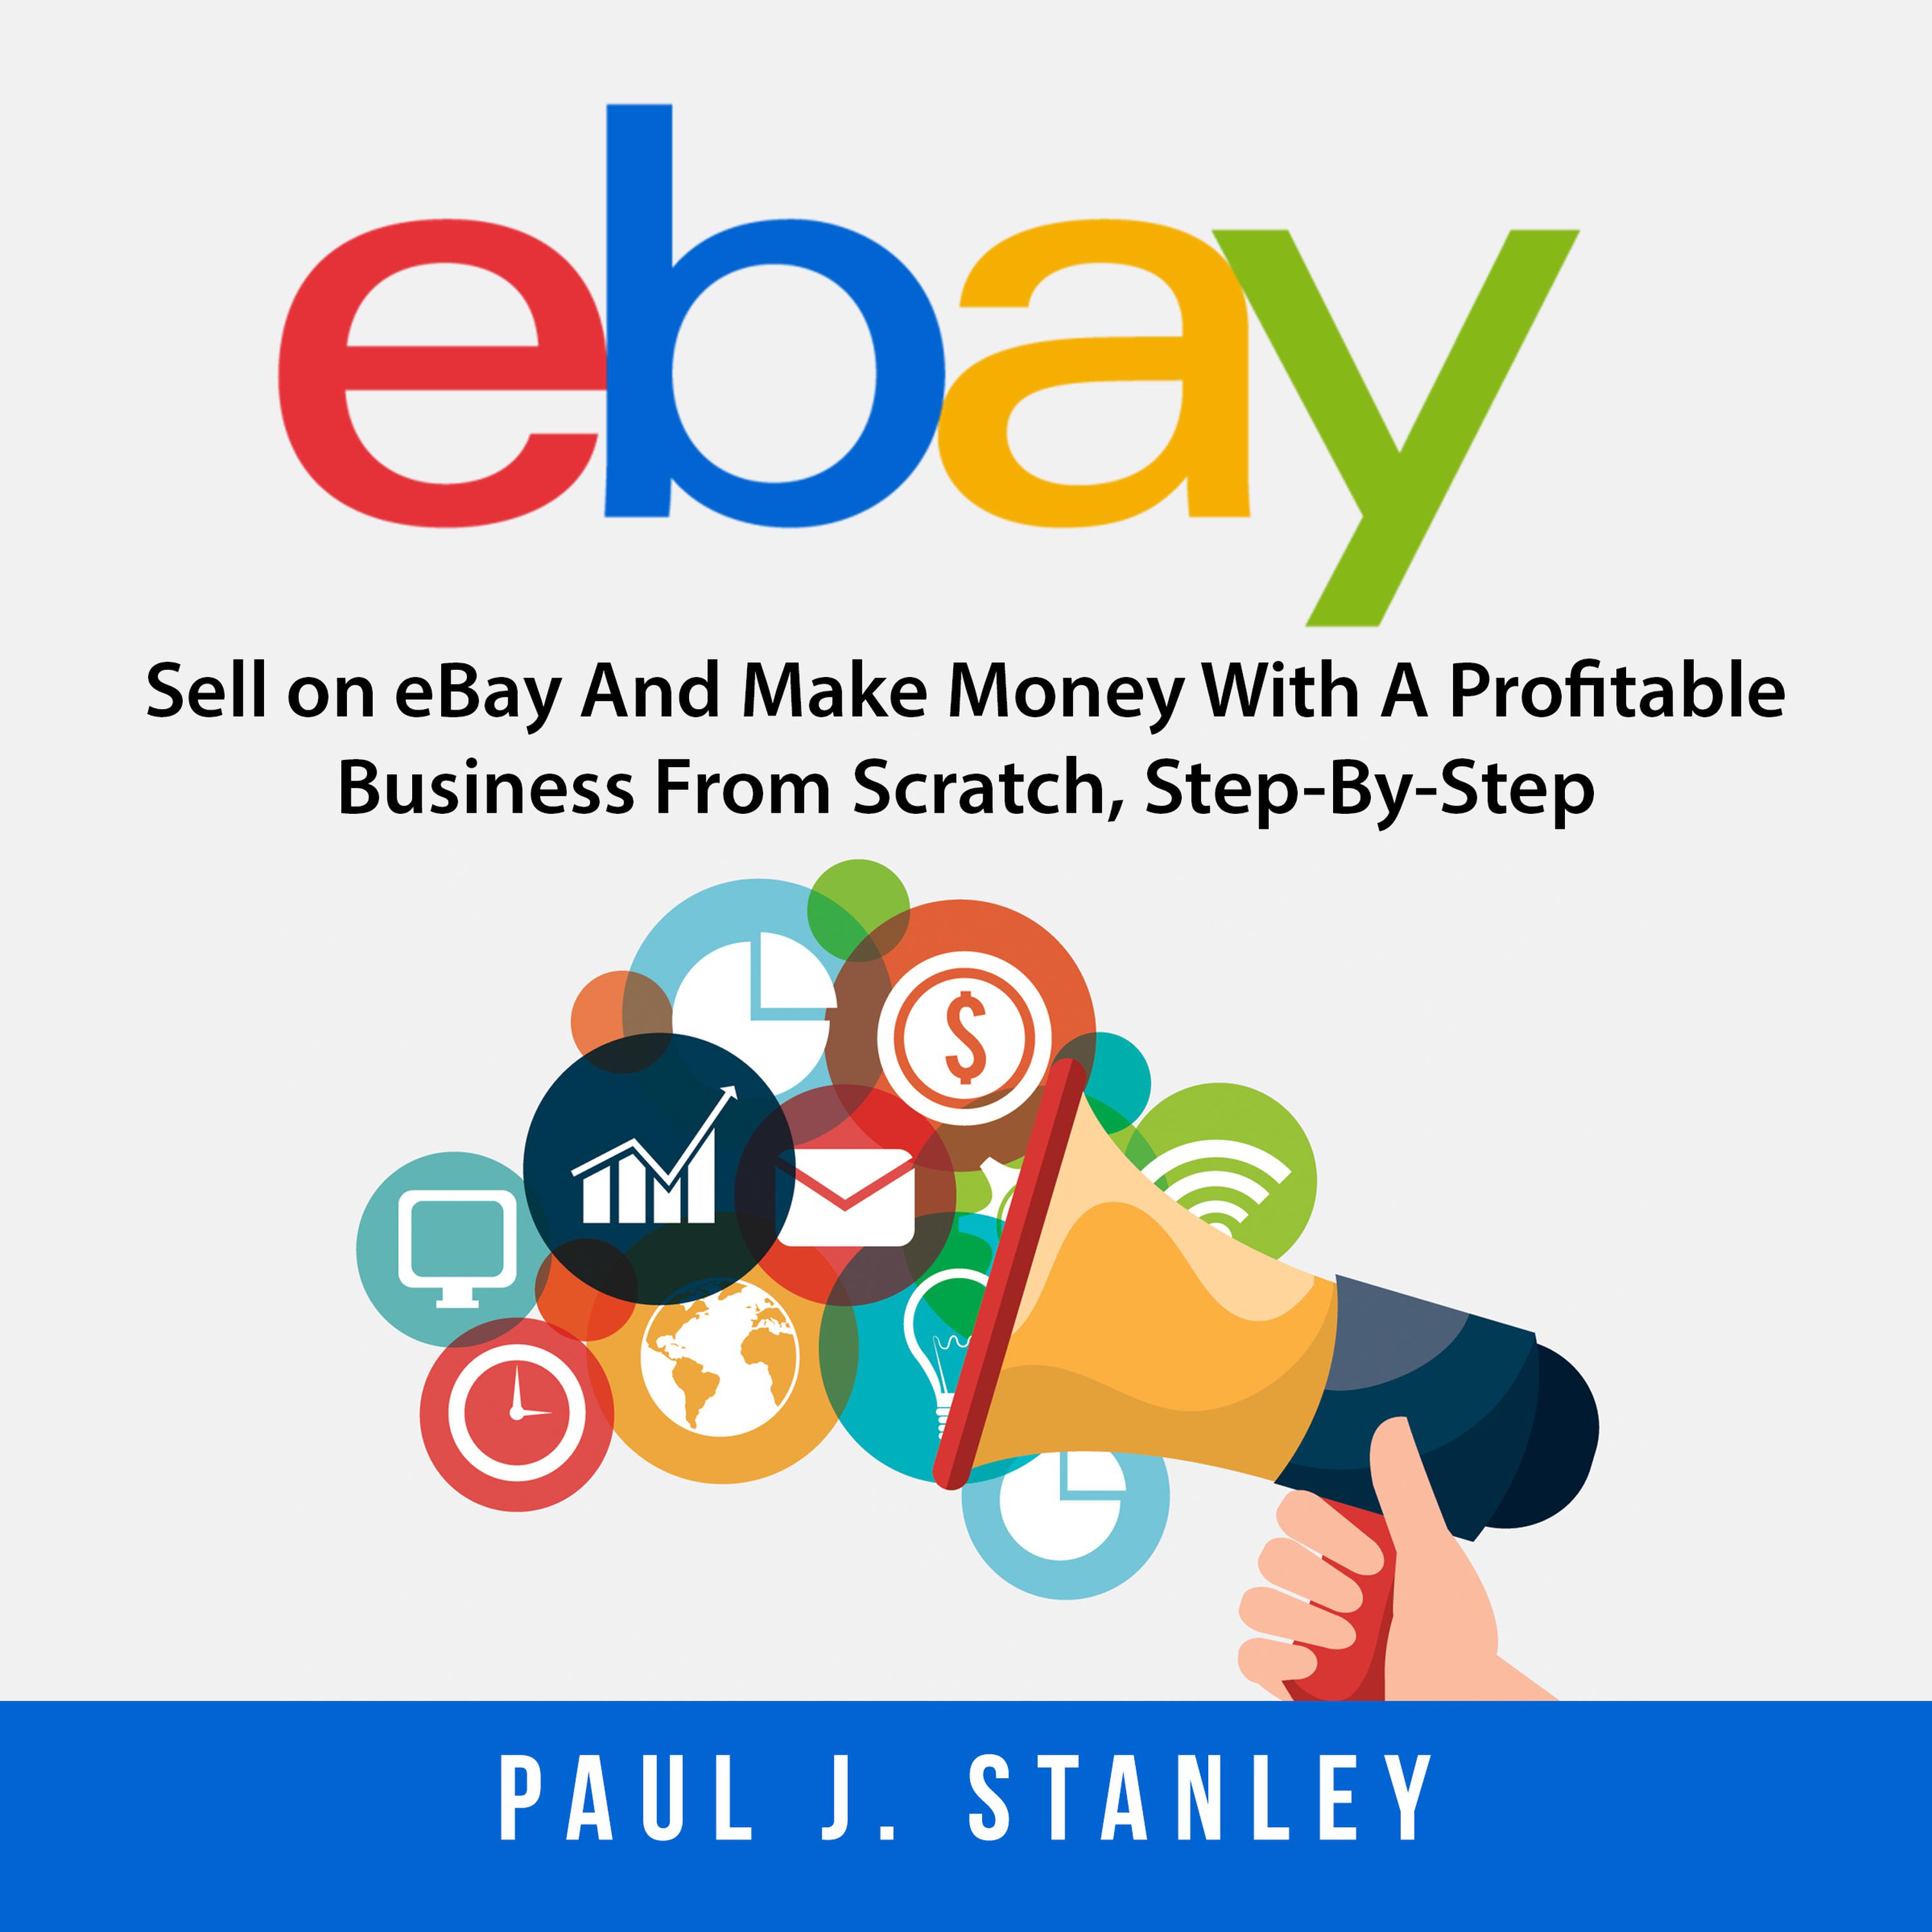 eBay: Sell on eBay And Make Money With A Profitable Business From Scratch, Step-By-Step Guide ...